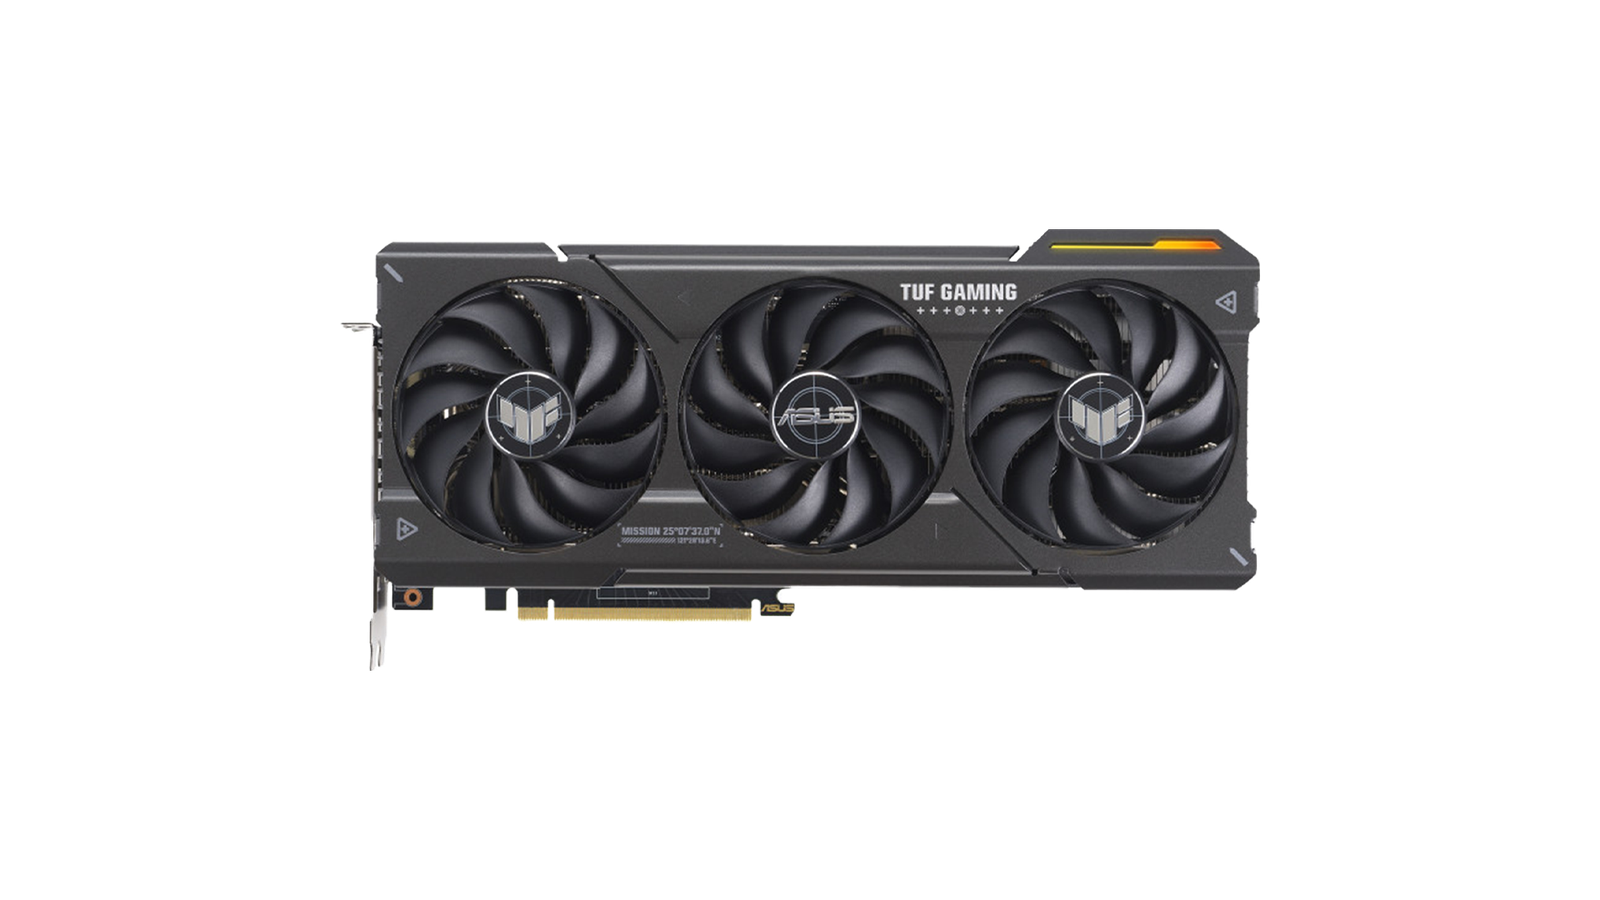 Nvidia GeForce RTX 4070 - The best graphics card for gaming for most people